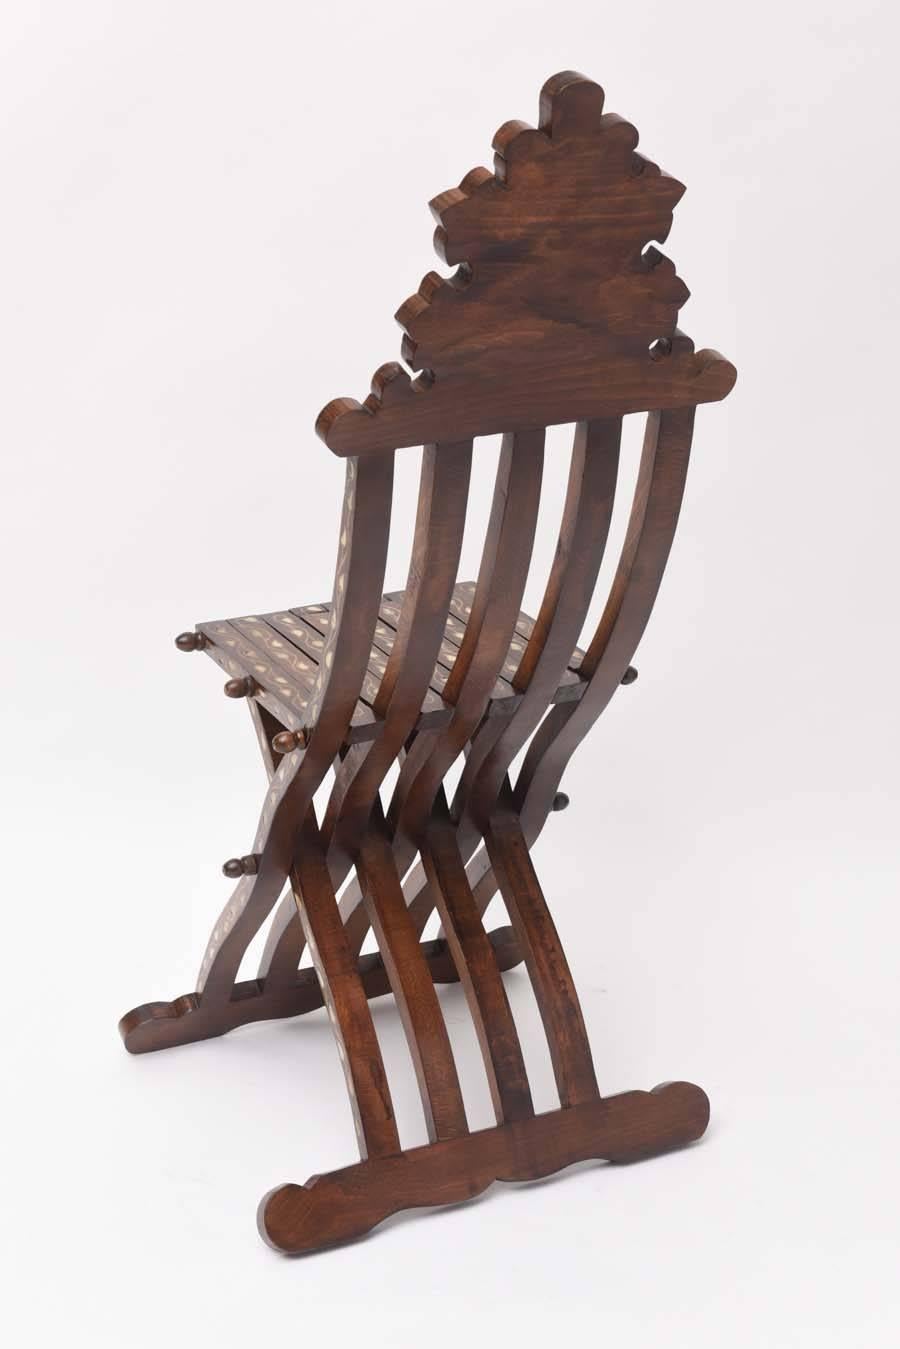 20th Century Syrian Mother-of-pearl Inlaid Folding Chair